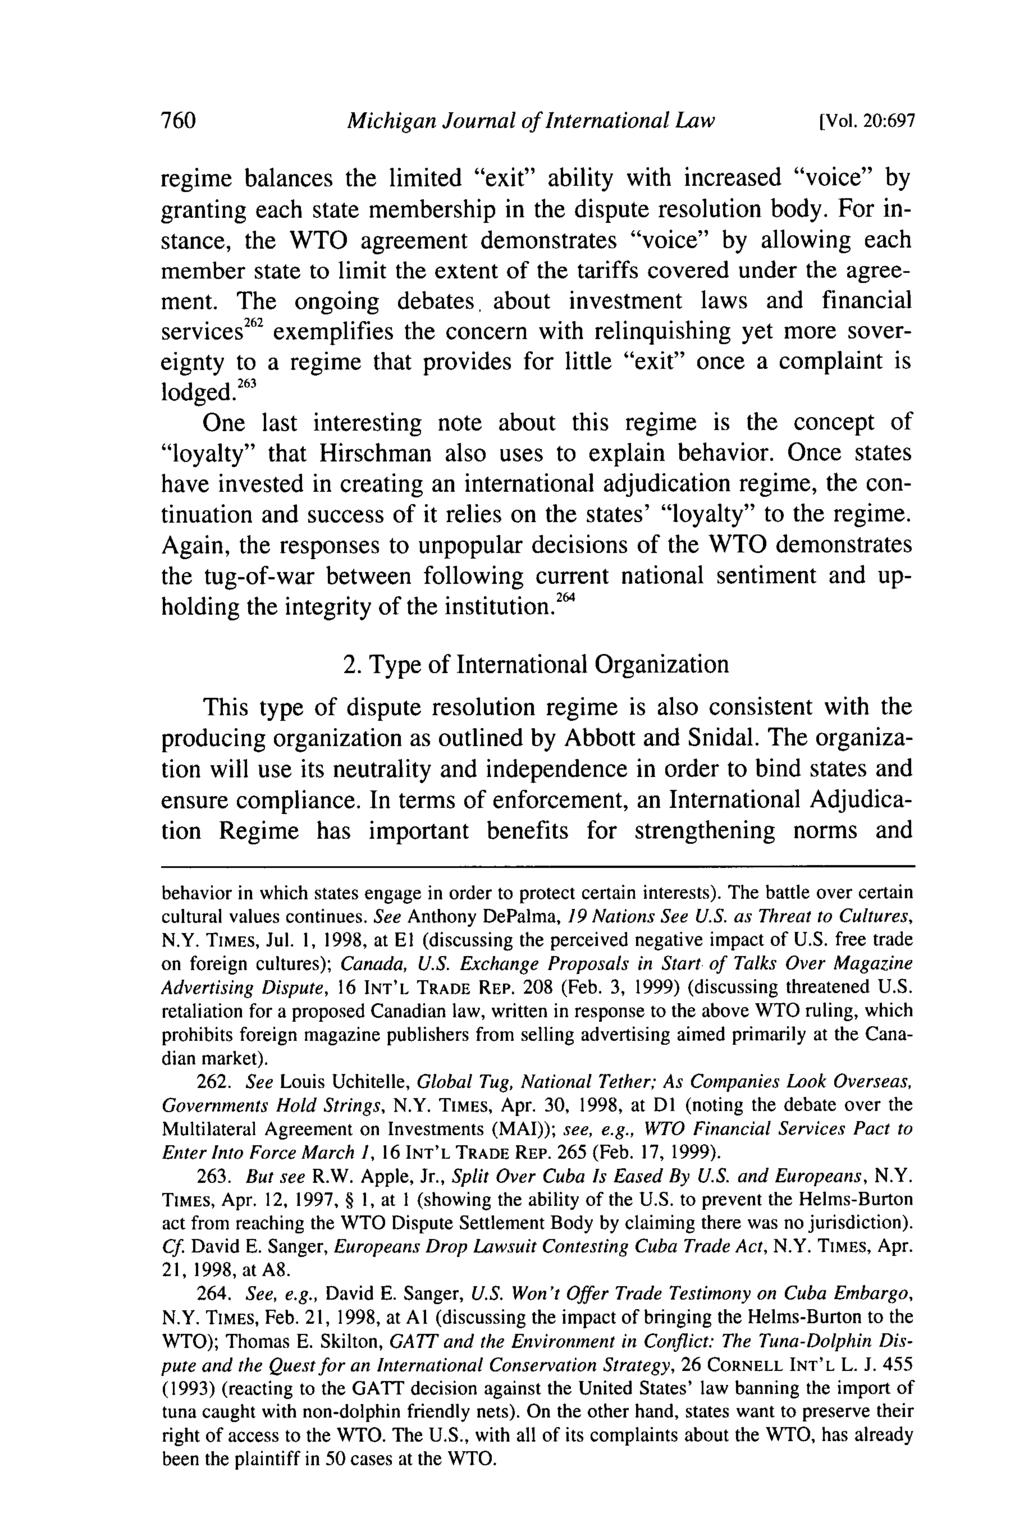 Michigan Journal of International Law [Vol. 20:697 regime balances the limited "exit" ability with increased "voice" by granting each state membership in the dispute resolution body.